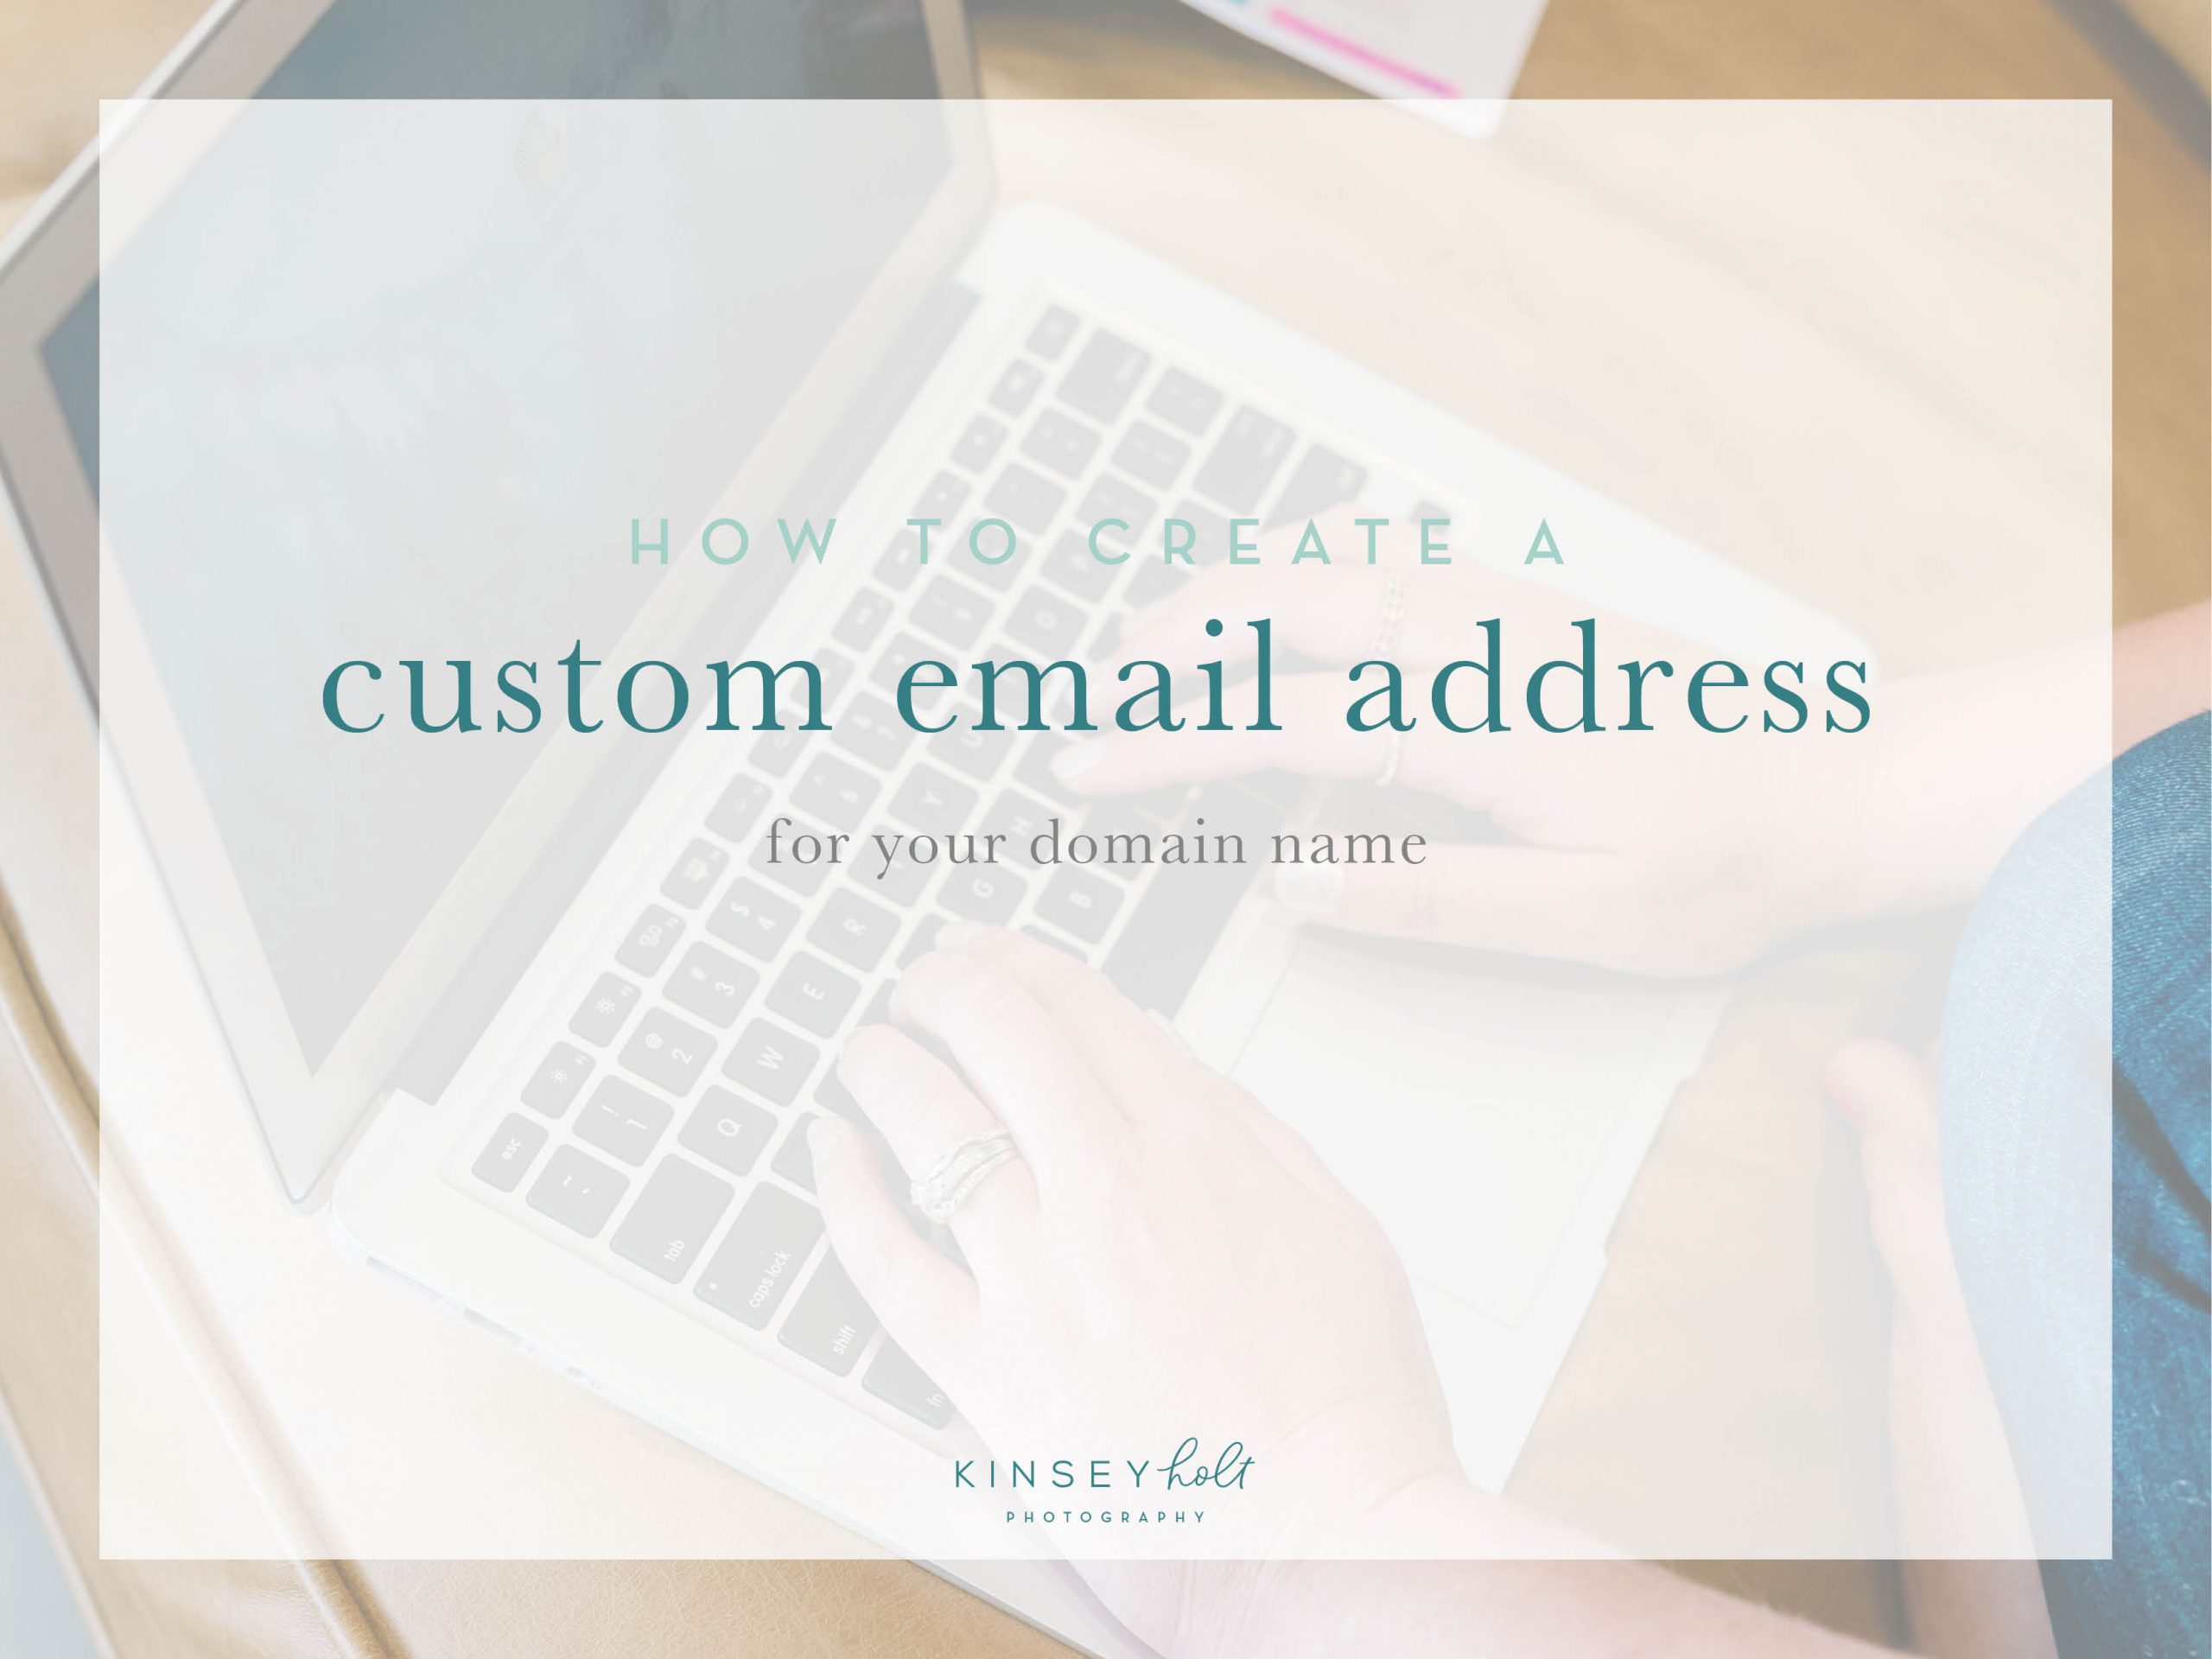 Make a custom email address to match your website!